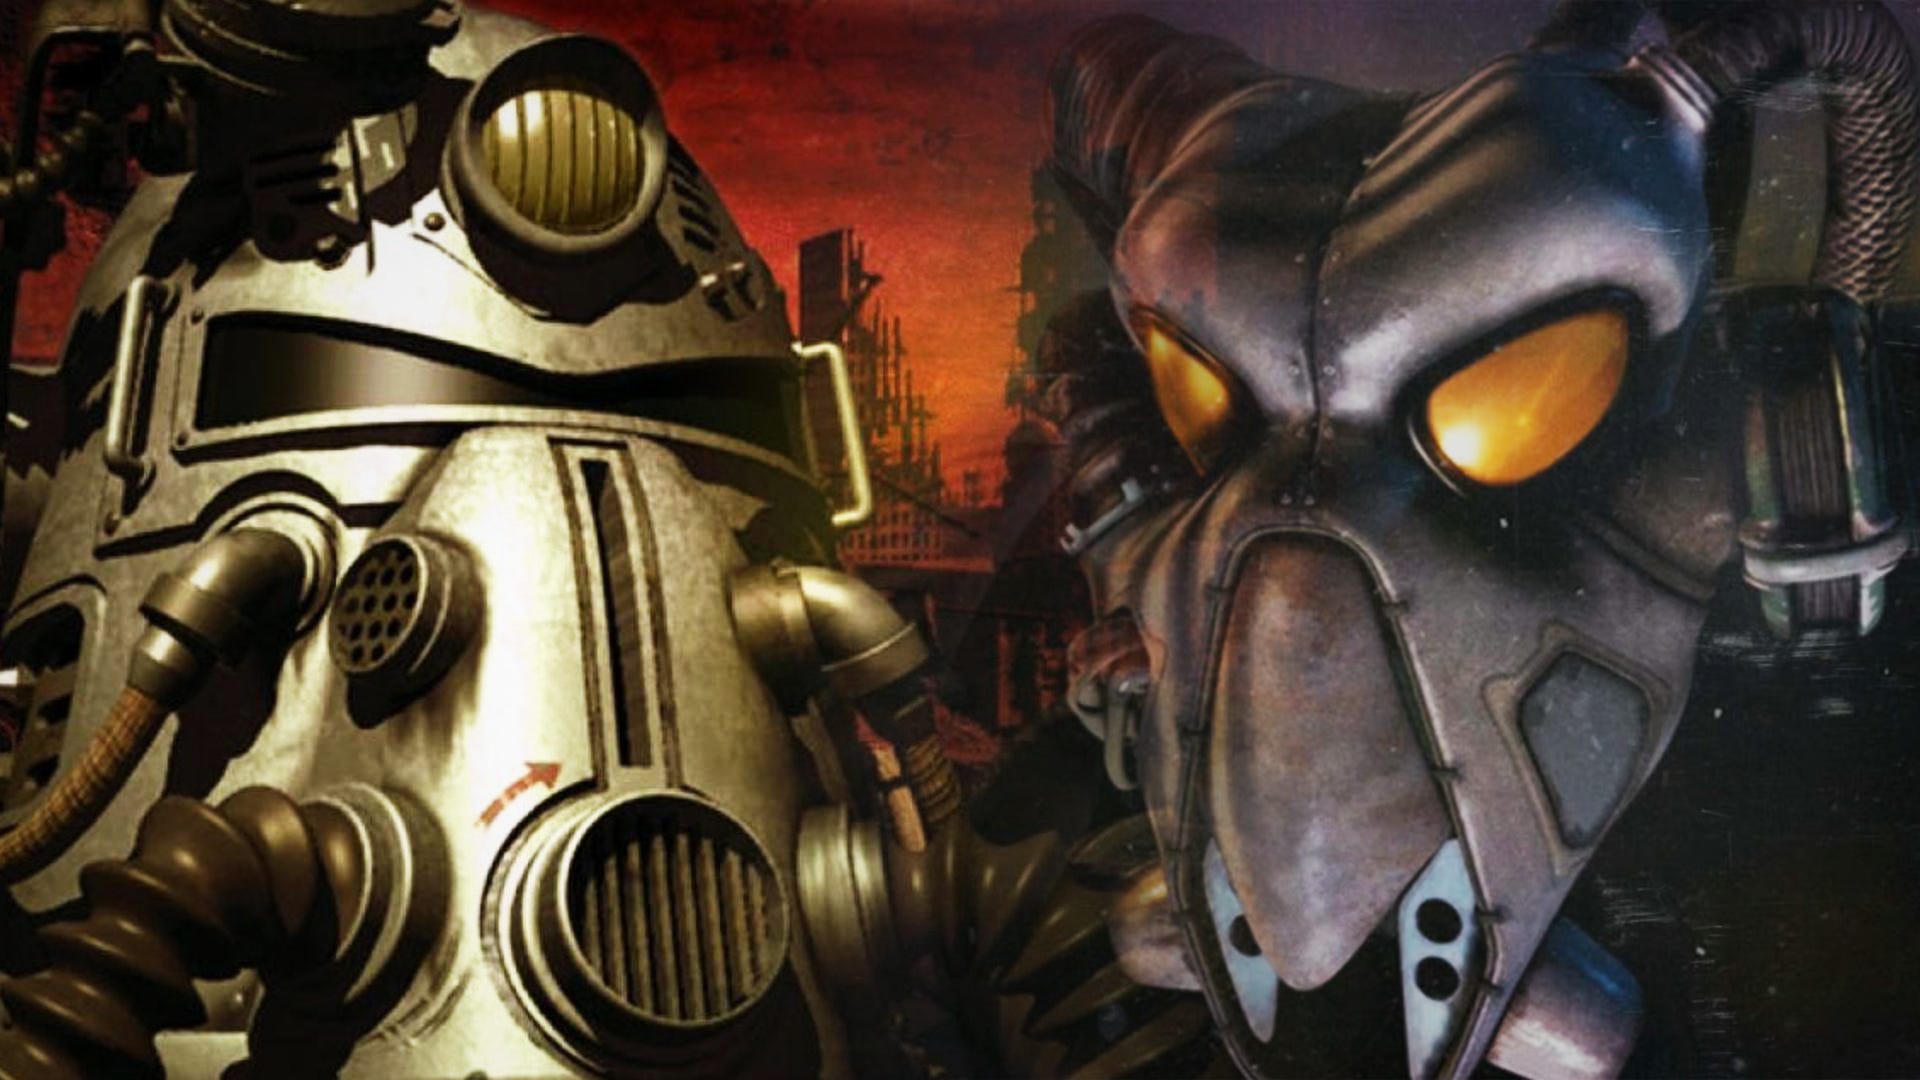 The original Fallout games show their age - but newer fans should still give them a shot